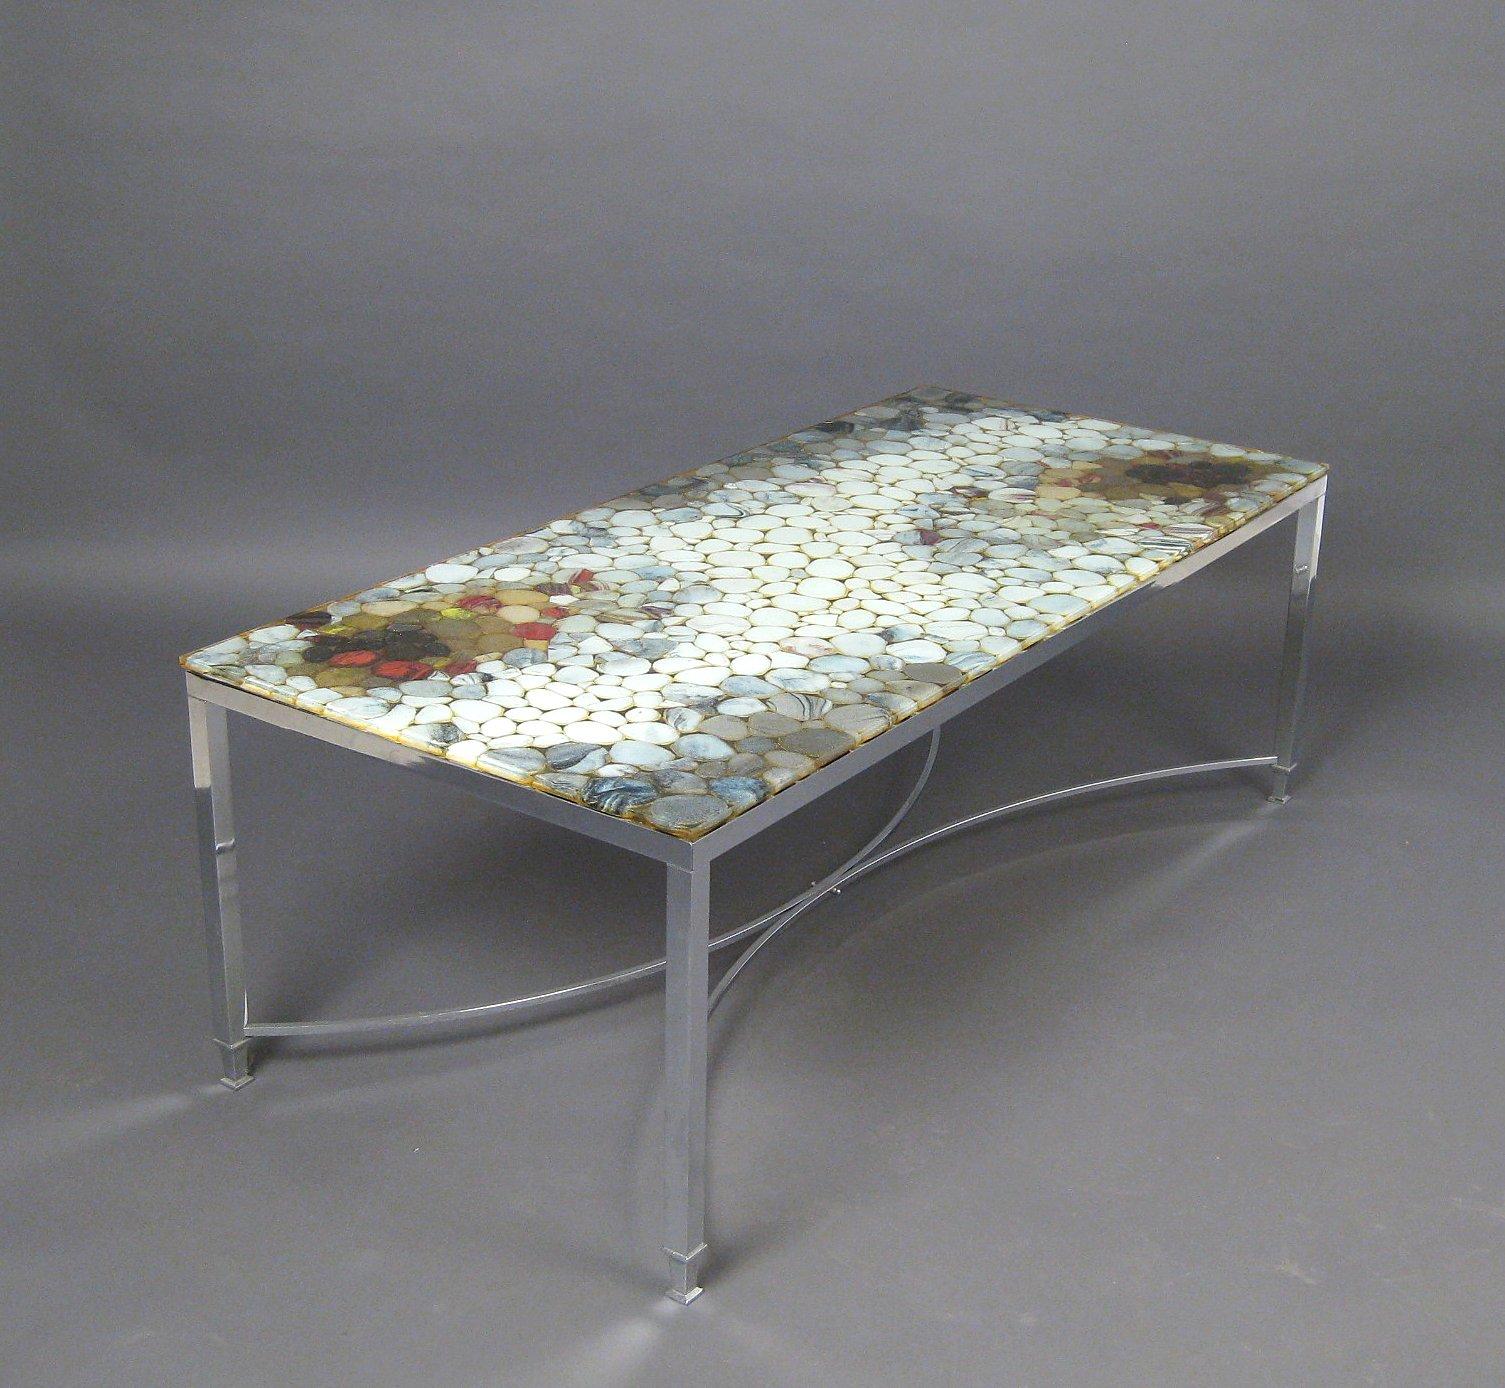 1970s Coffee Table With Natural Stone and Acrylic Top, Danish For Sale 1